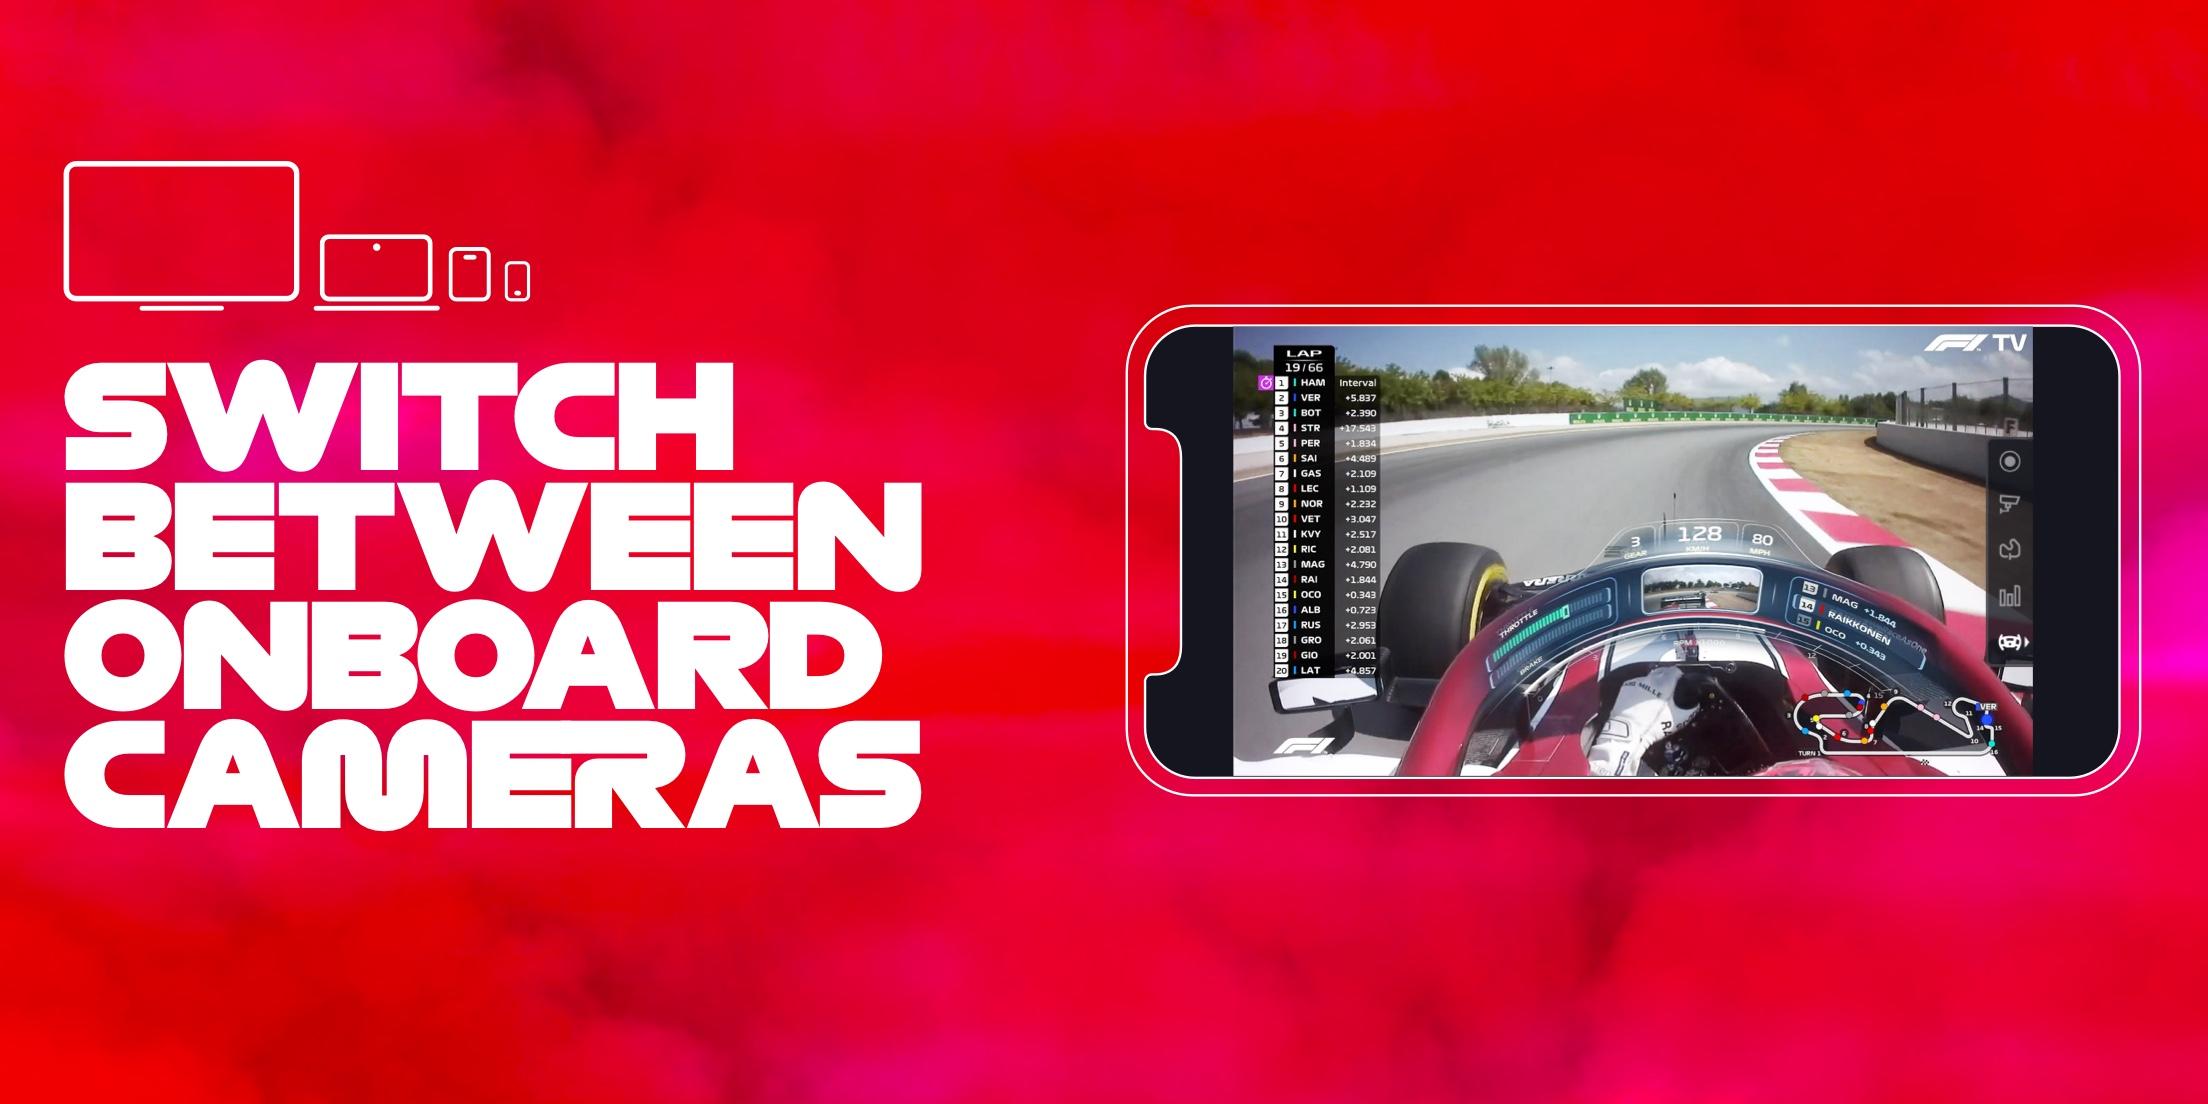 F1 TV for Android - APK Download